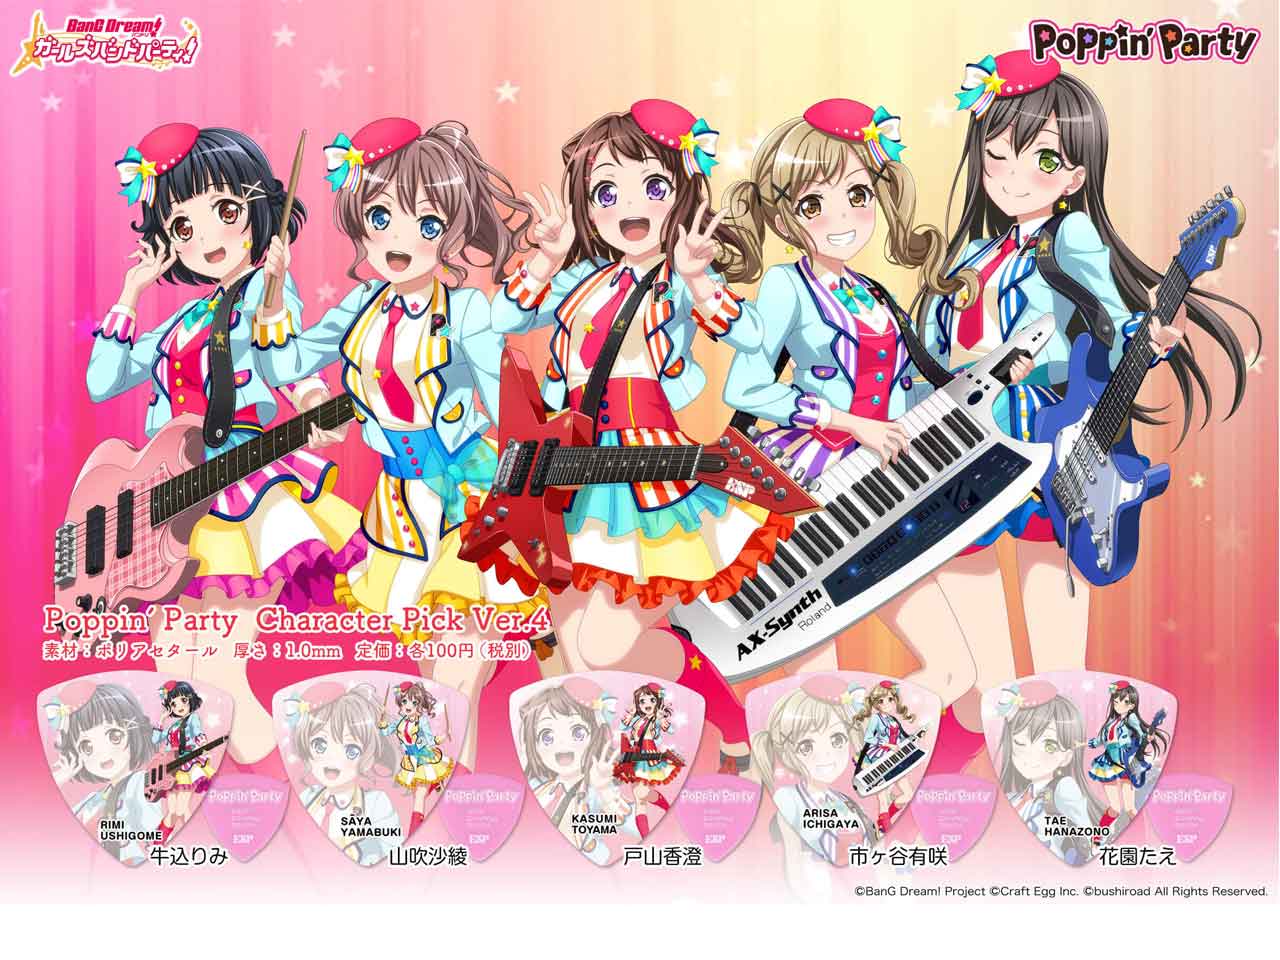 【ESP×BanG Dream!コラボピック】Poppin’Party Character Pick Ver.4 "山吹沙綾"（GBP Saya Poppin Party 4）＆”ハメパチ” セット